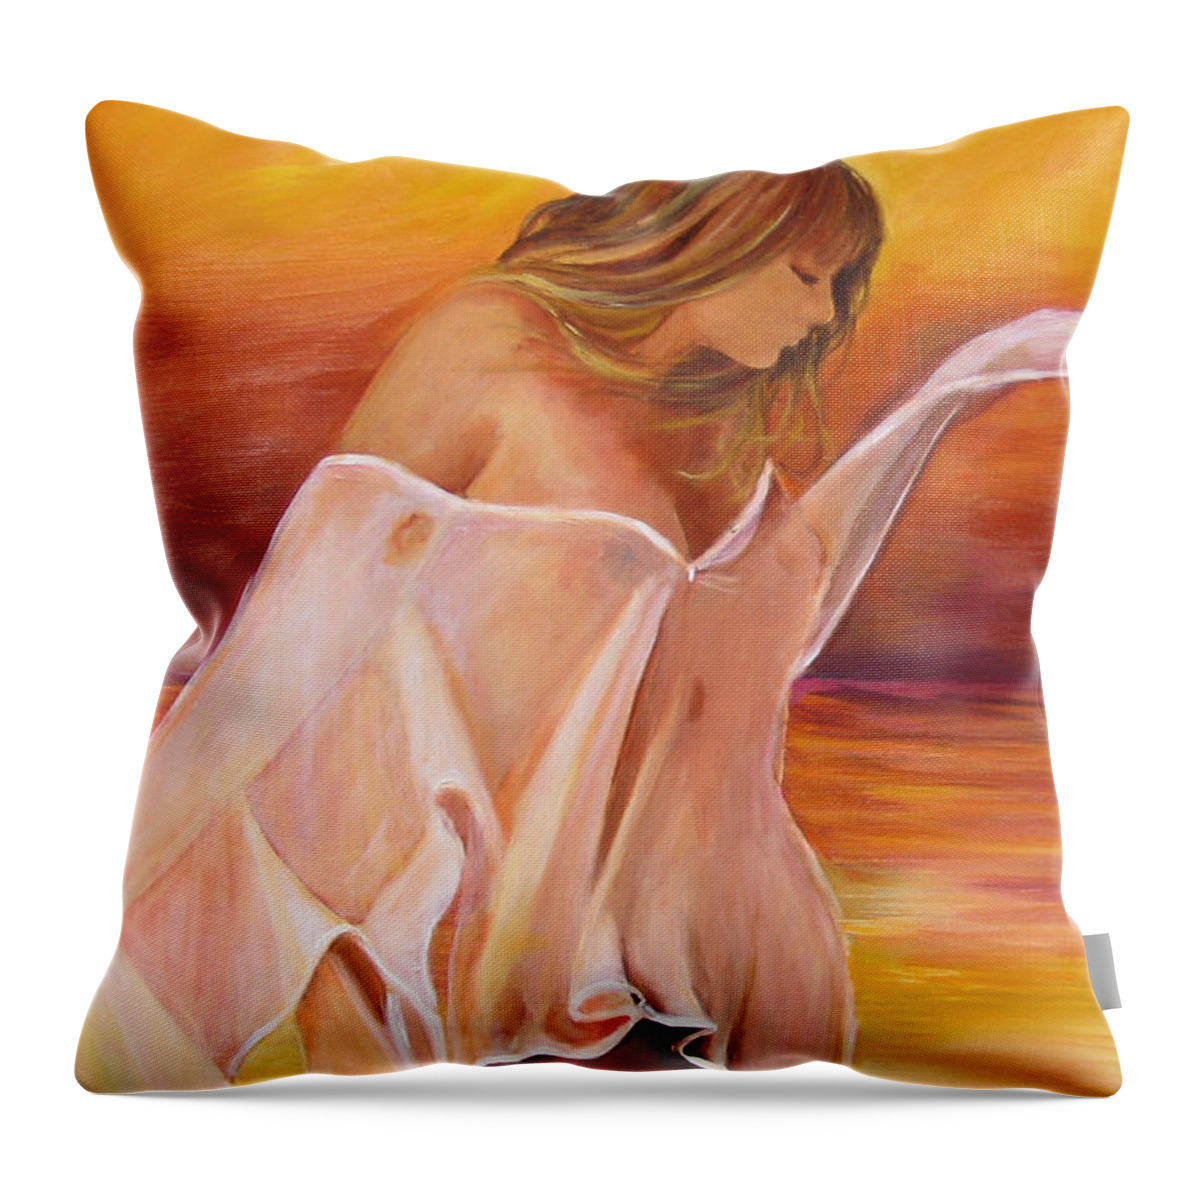 Woman Throw Pillow featuring the painting Dream by Sheri Chakamian